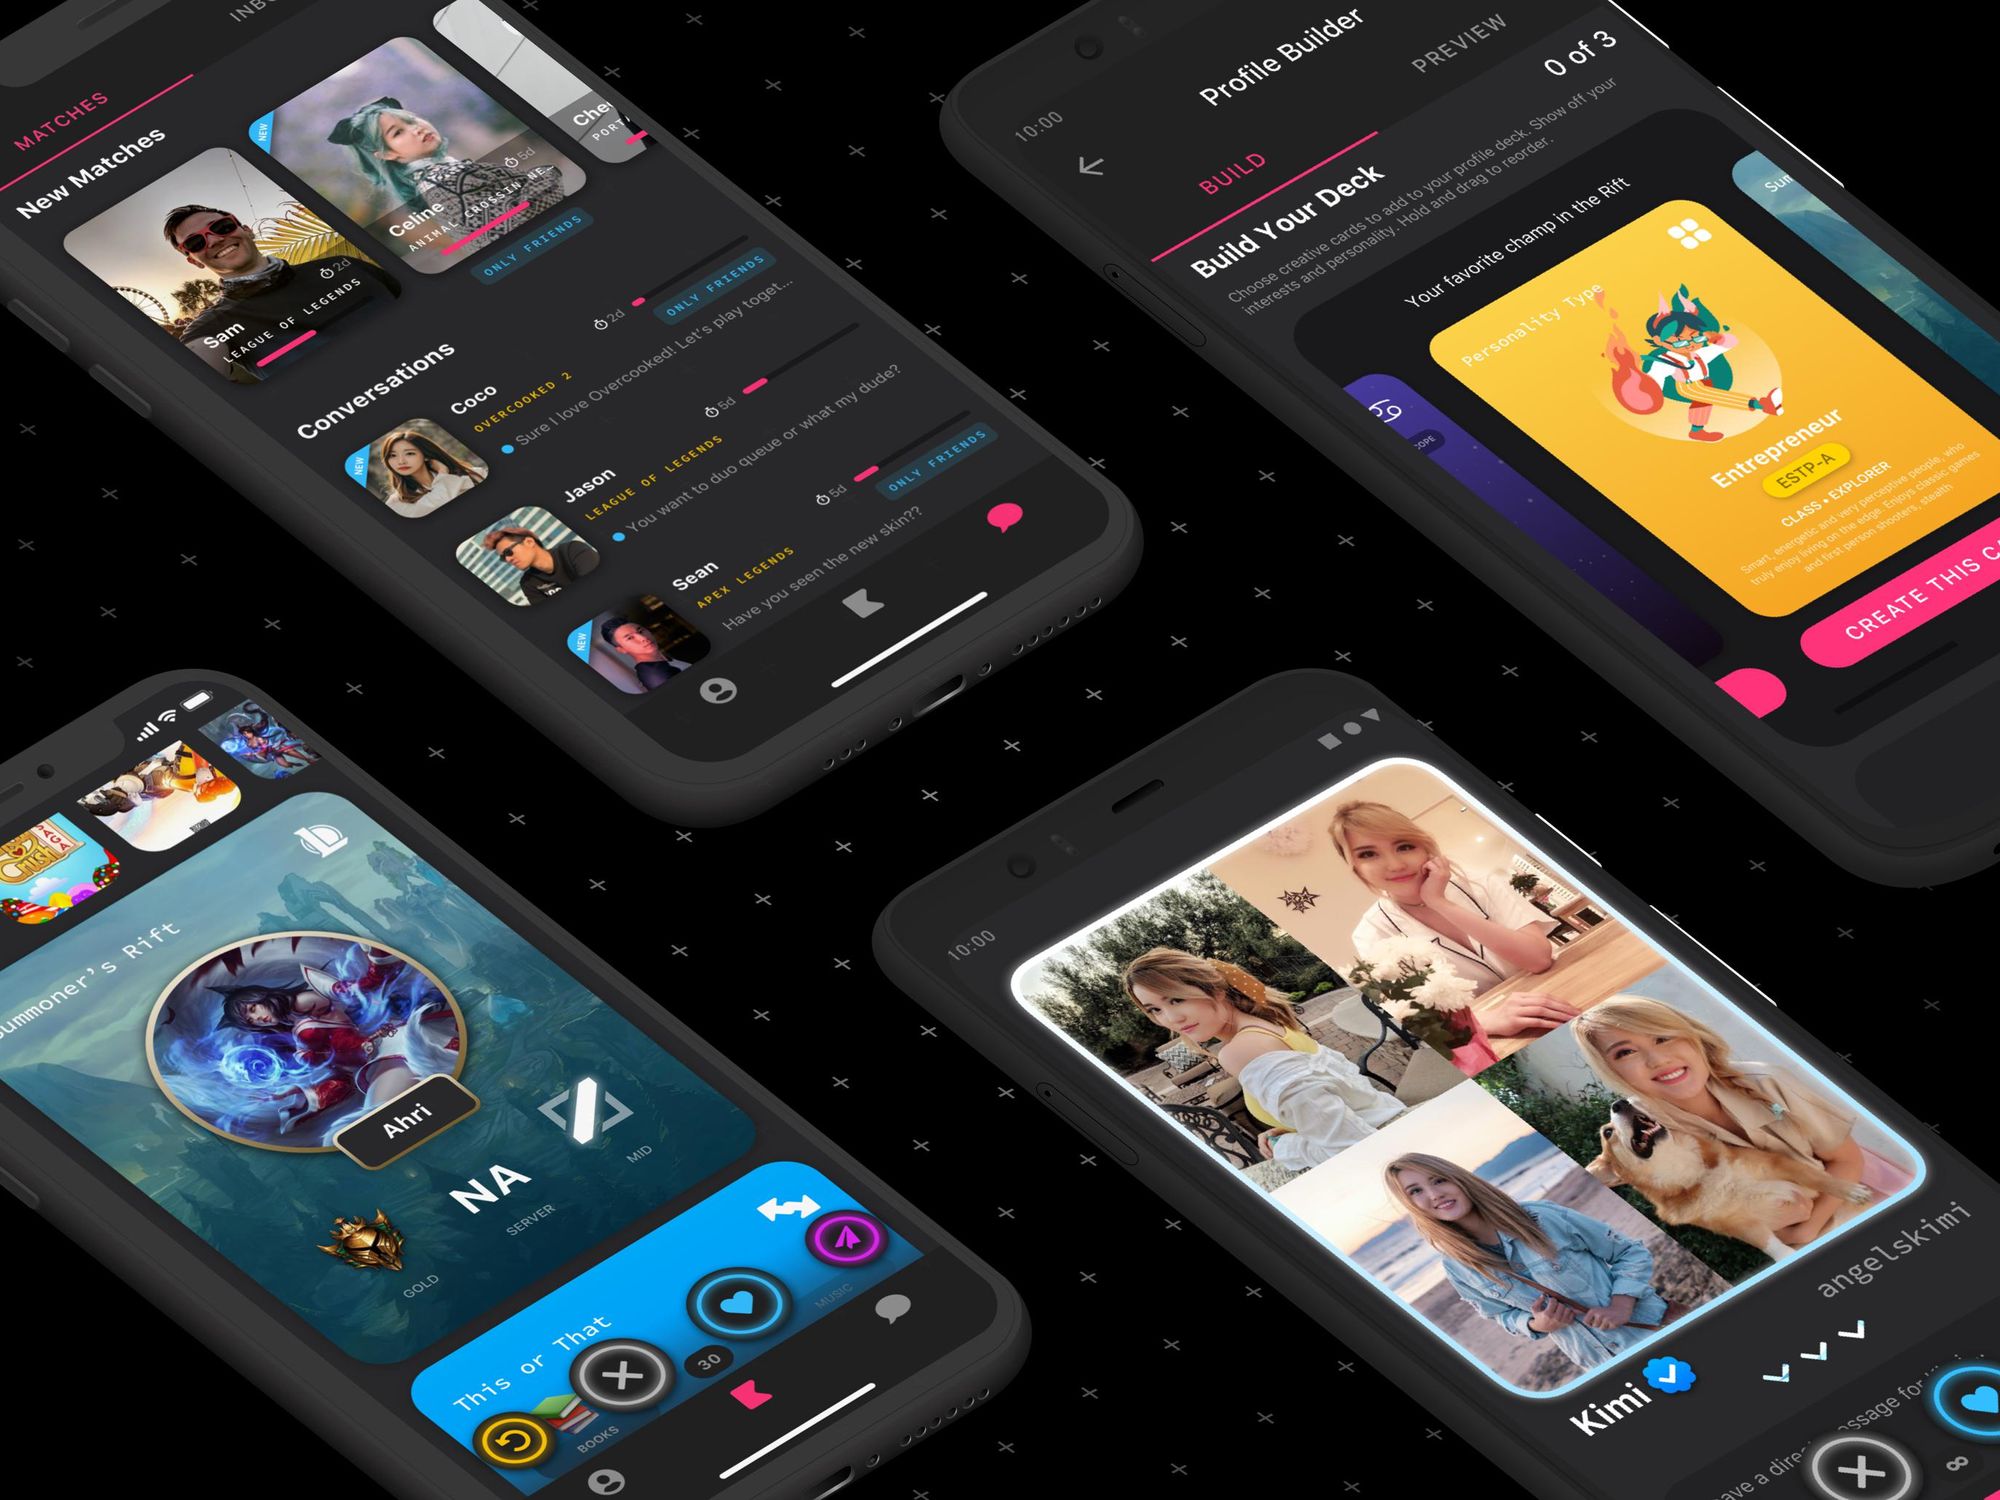 Kippo, a Dating App For Gamers, Enters the Metaverse